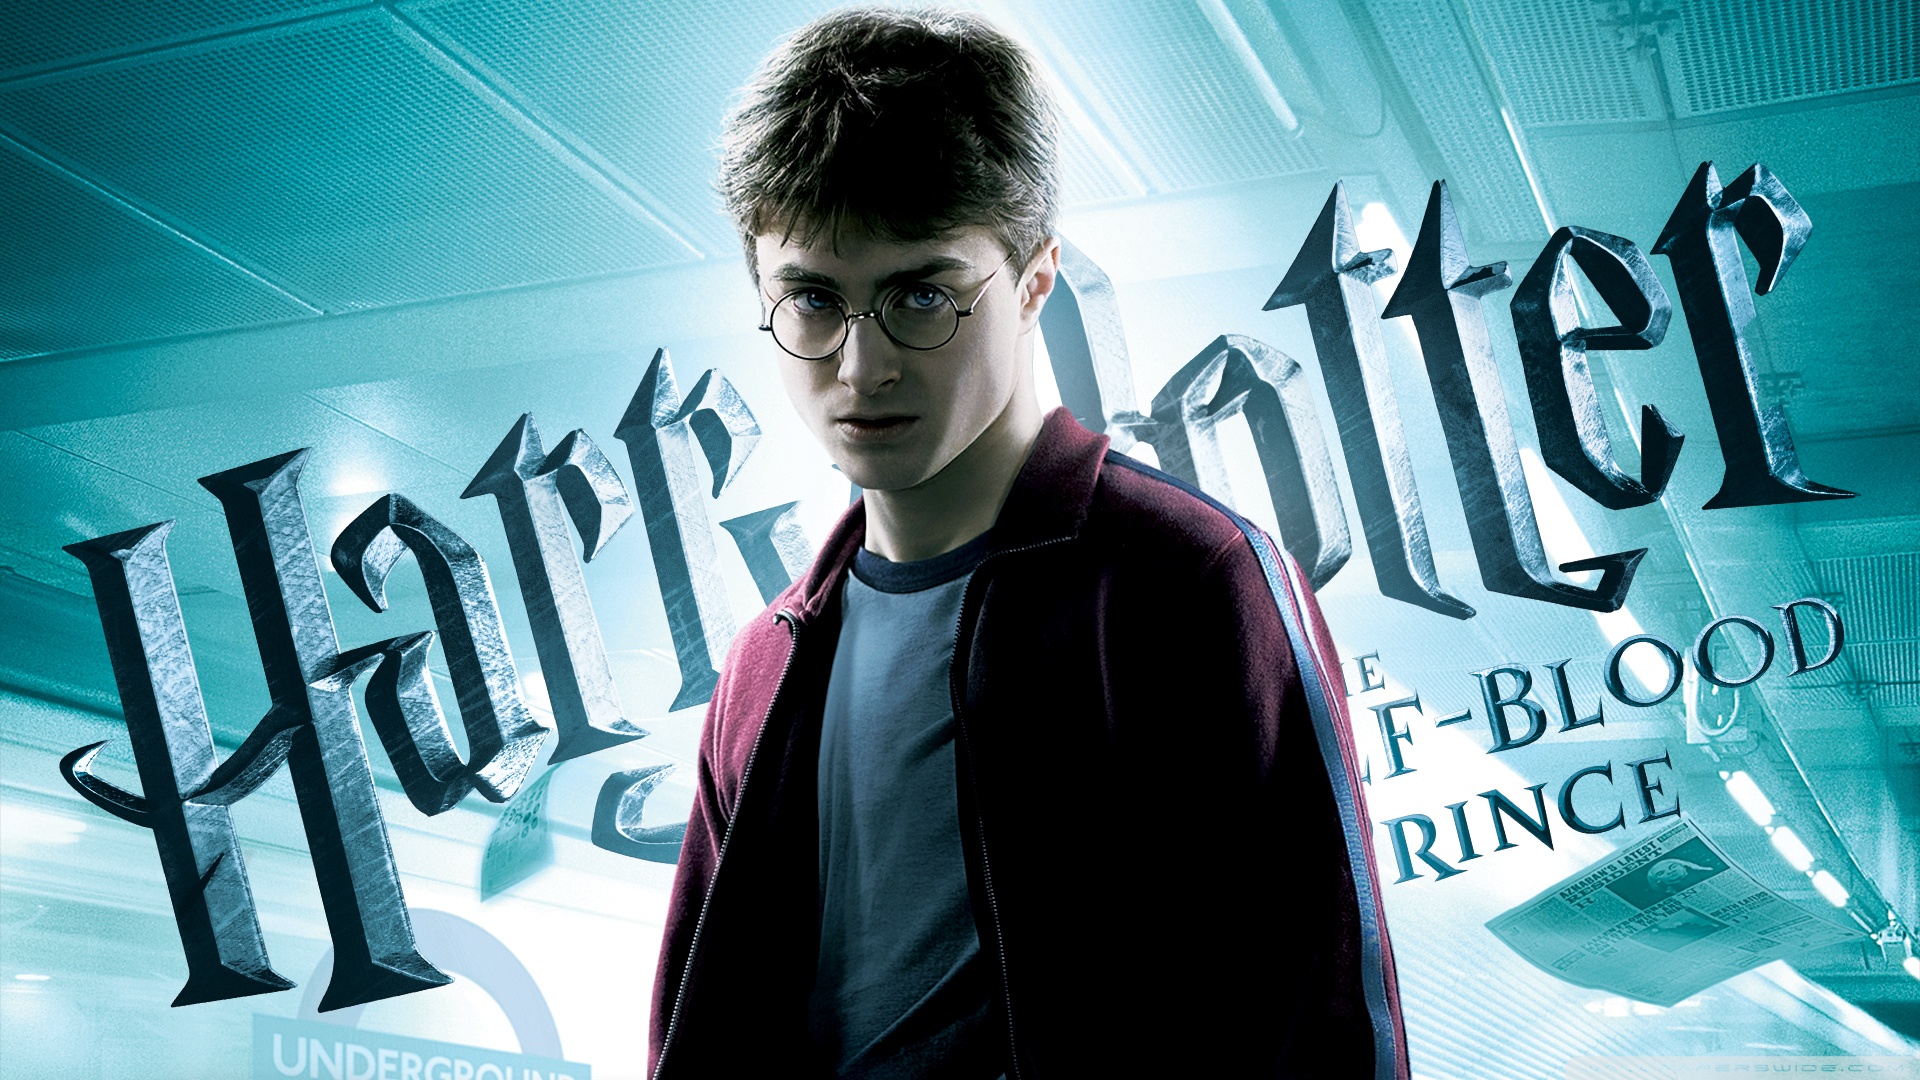 Harry Potter and the Half-Blood Prince 2009 BRRip 1080p